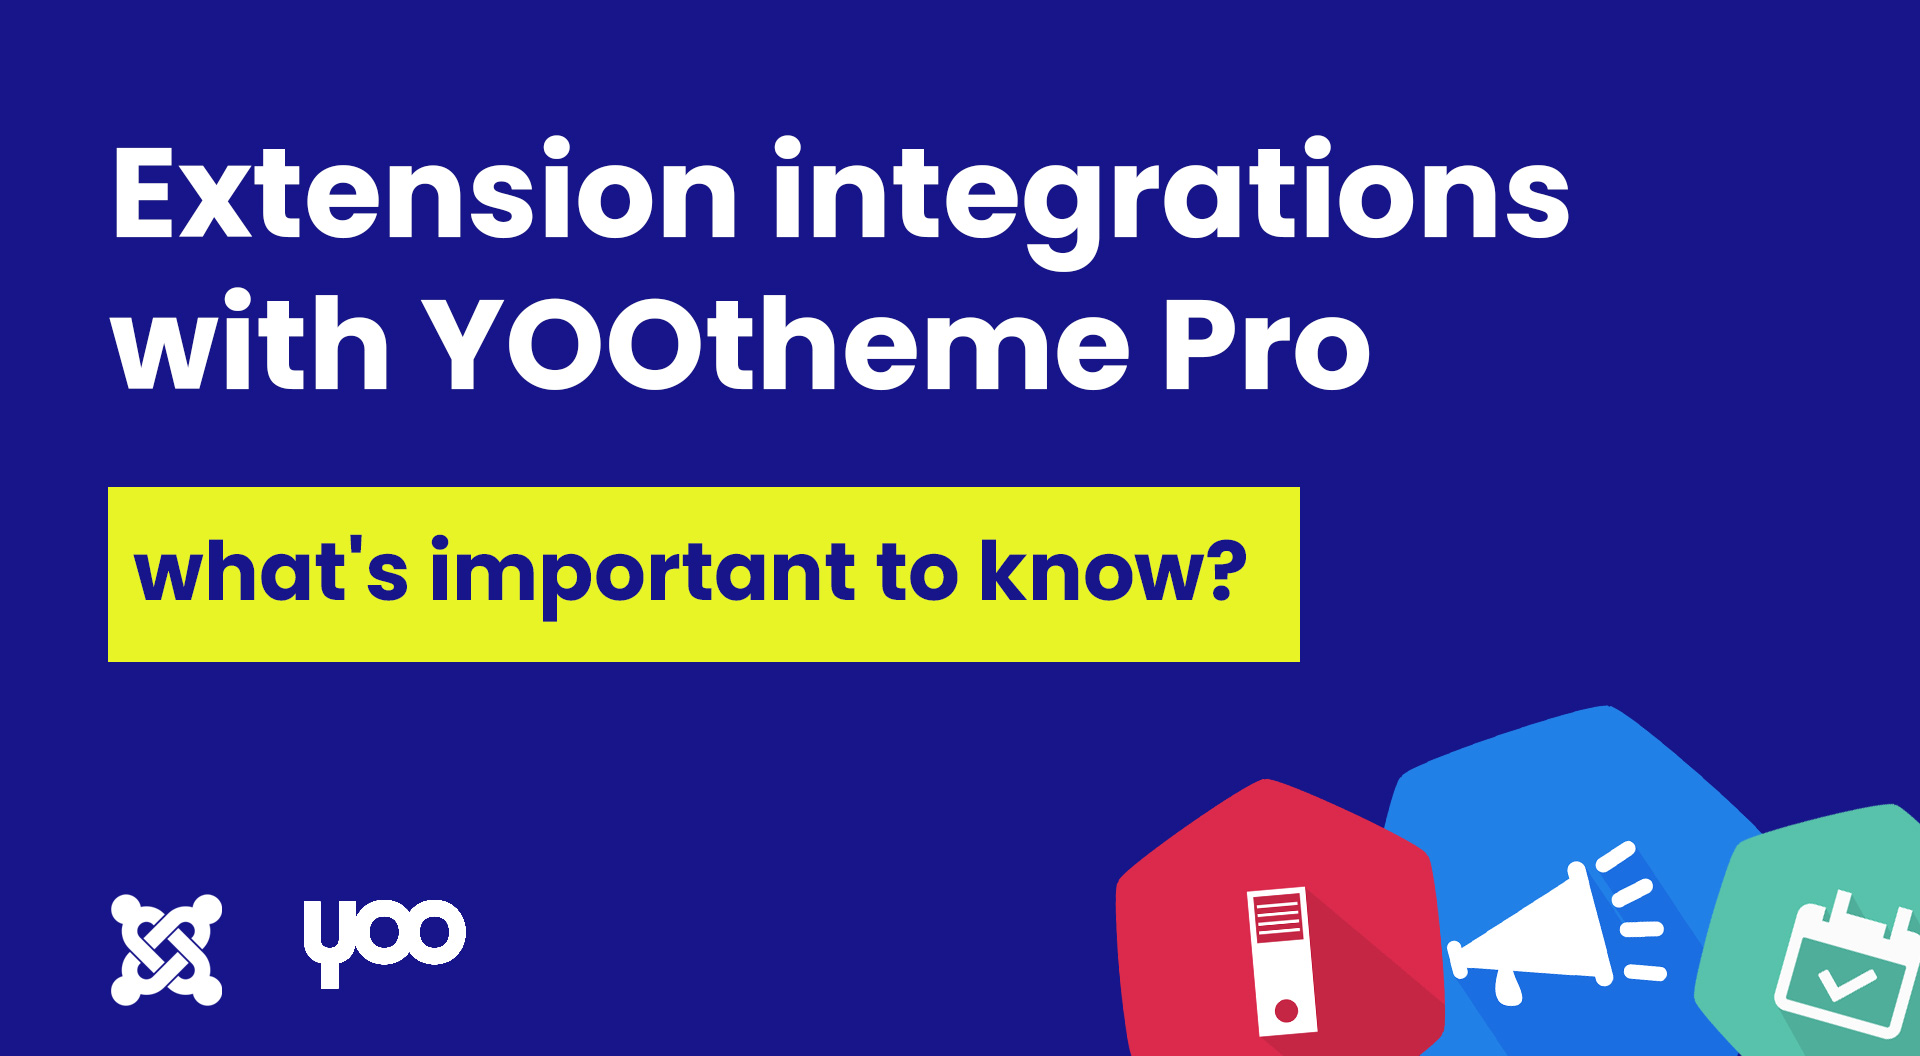 Integrations with the YOOtheme Pro